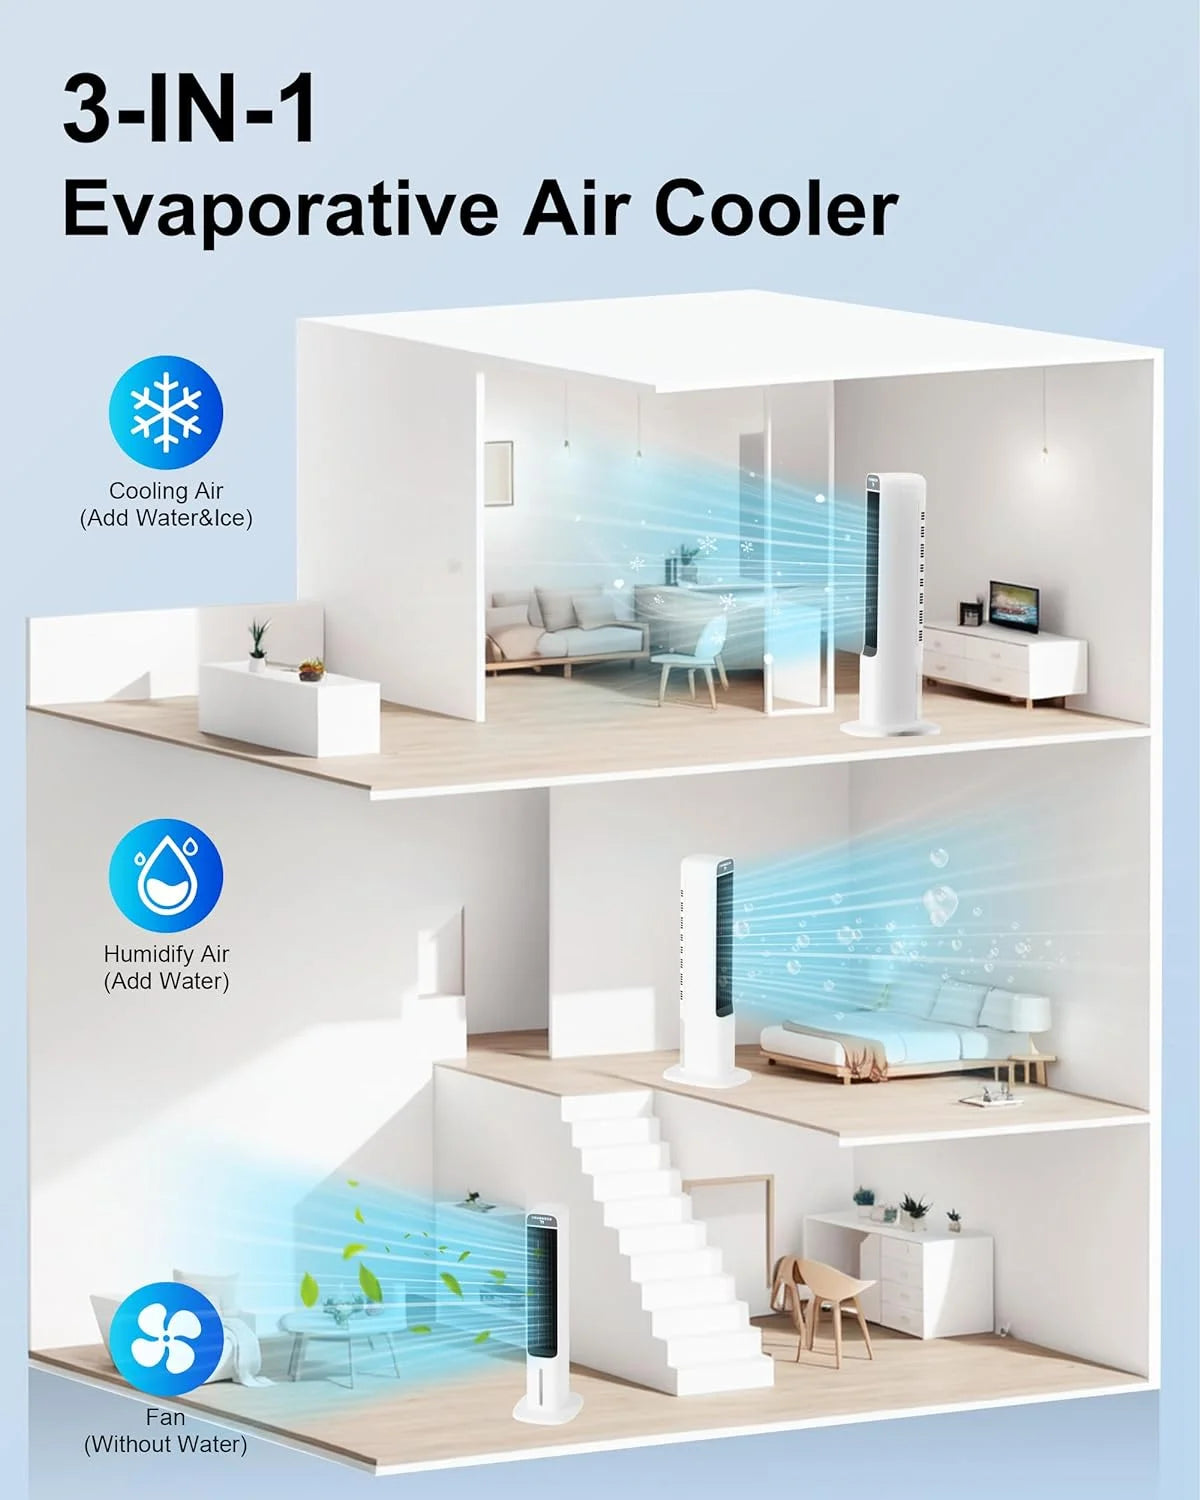 MINGFENG 41" Swamp Cooler, Evaporative Air Cooler With 4 Ice Packs And Remote, 80° Oscillation 3 Speeds 3 Modes, Cooling Fan That Blow Cold Air, Bladeless Tower Fan For Bedroom Home Office